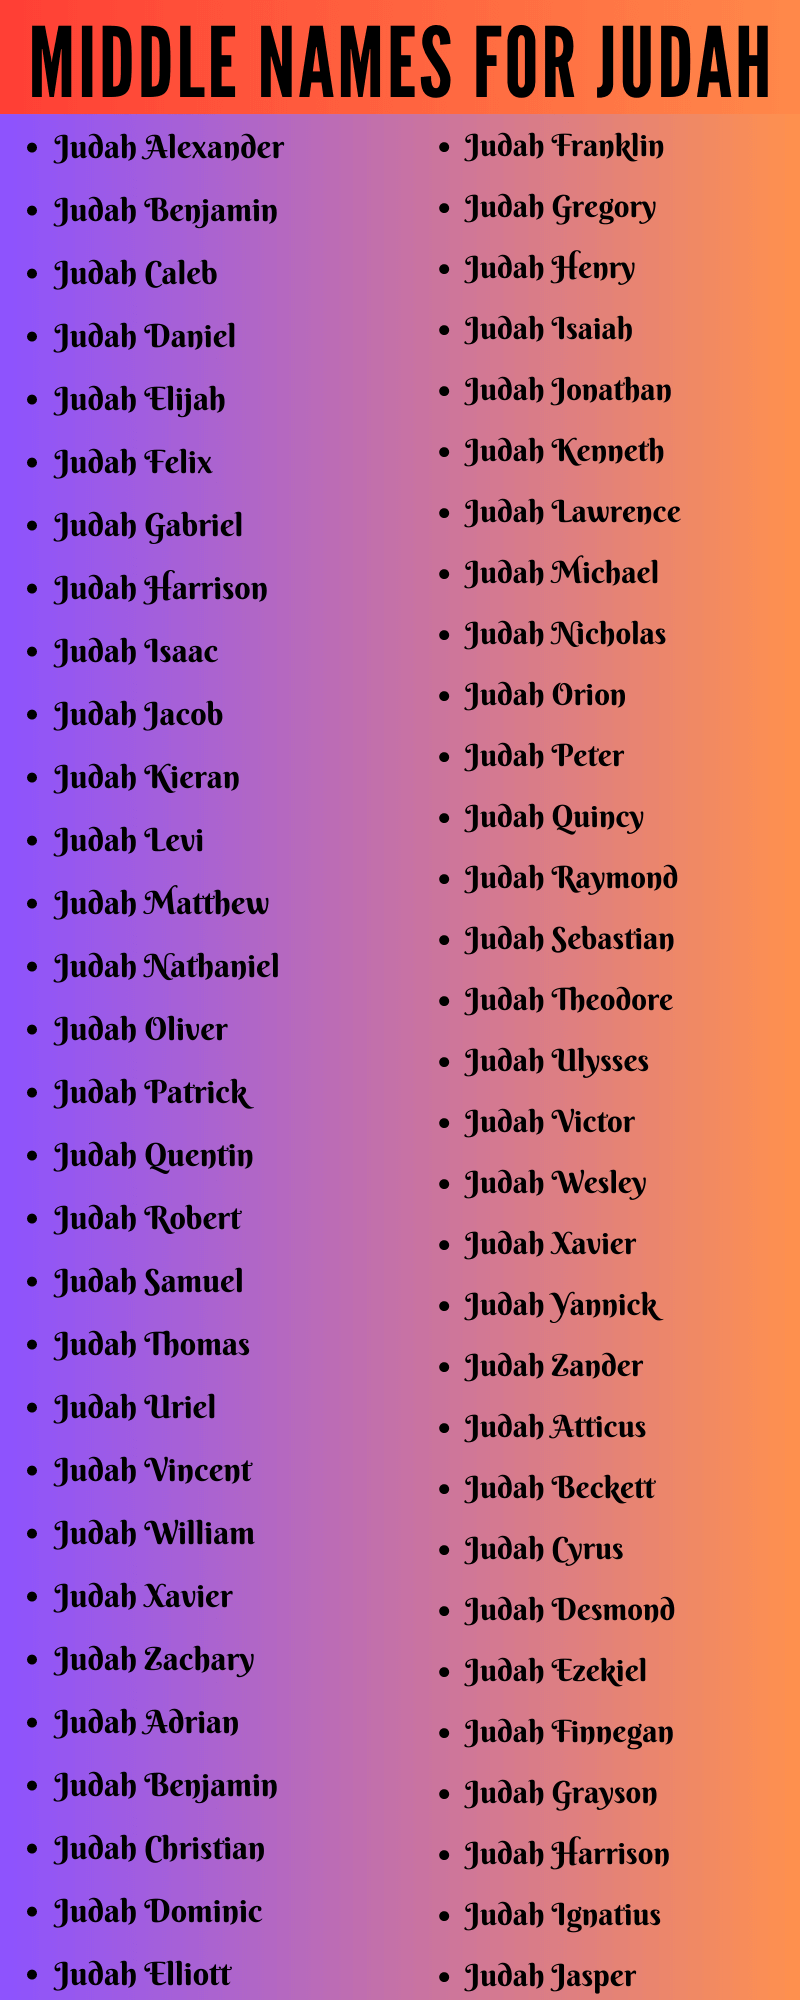 400 Creative Middle Names For Judah